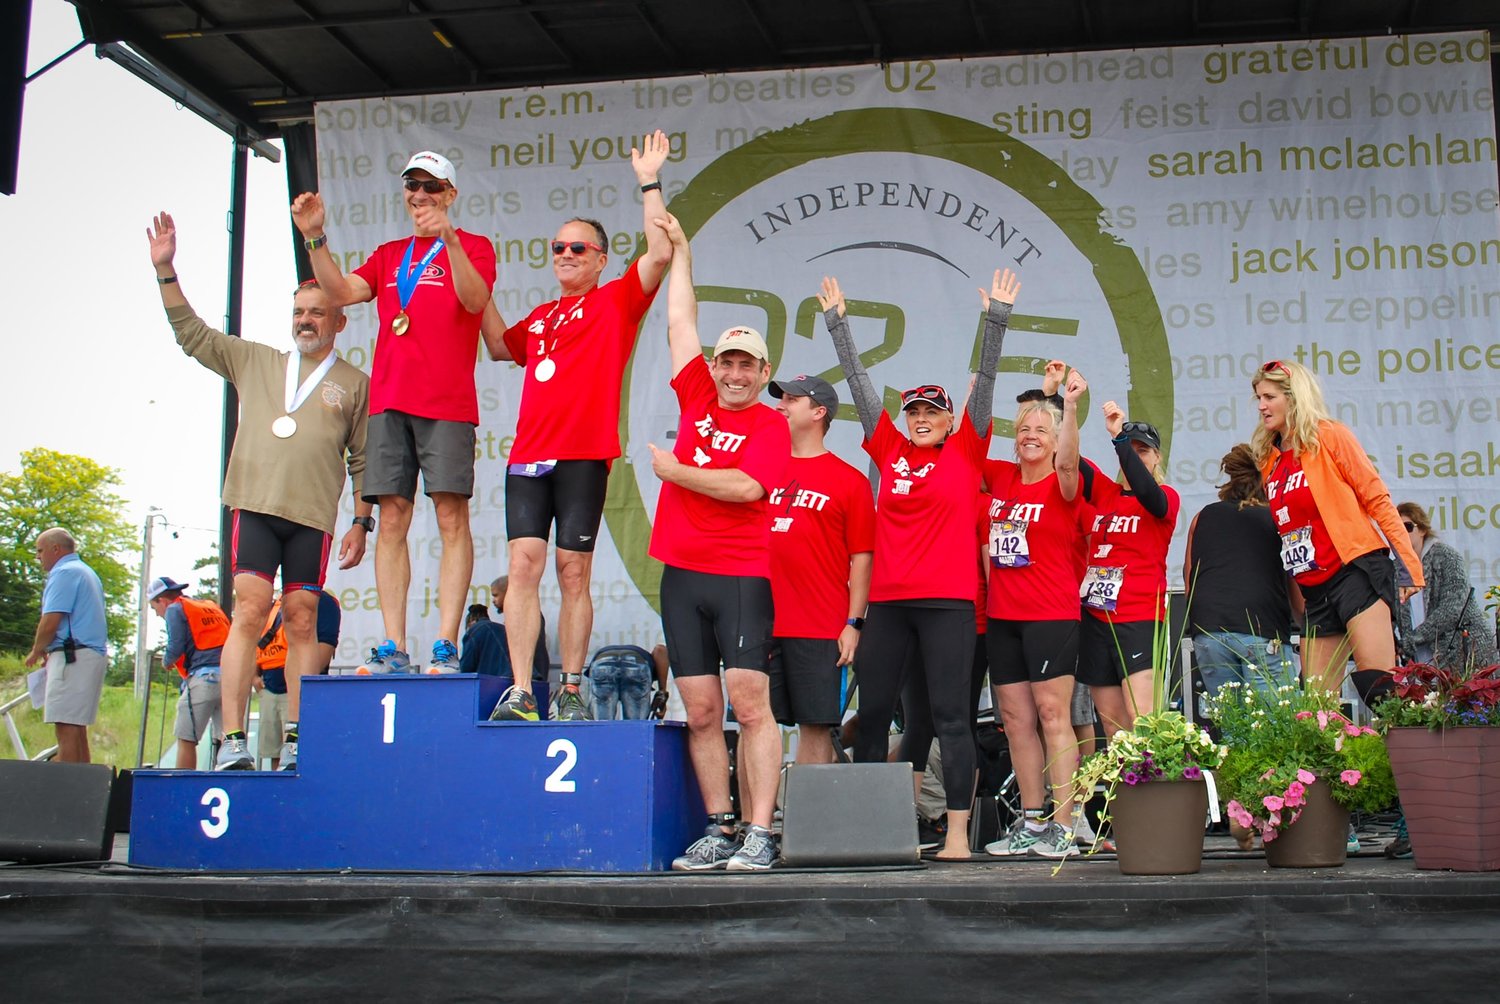 triathlon runners standing and waving on a podium